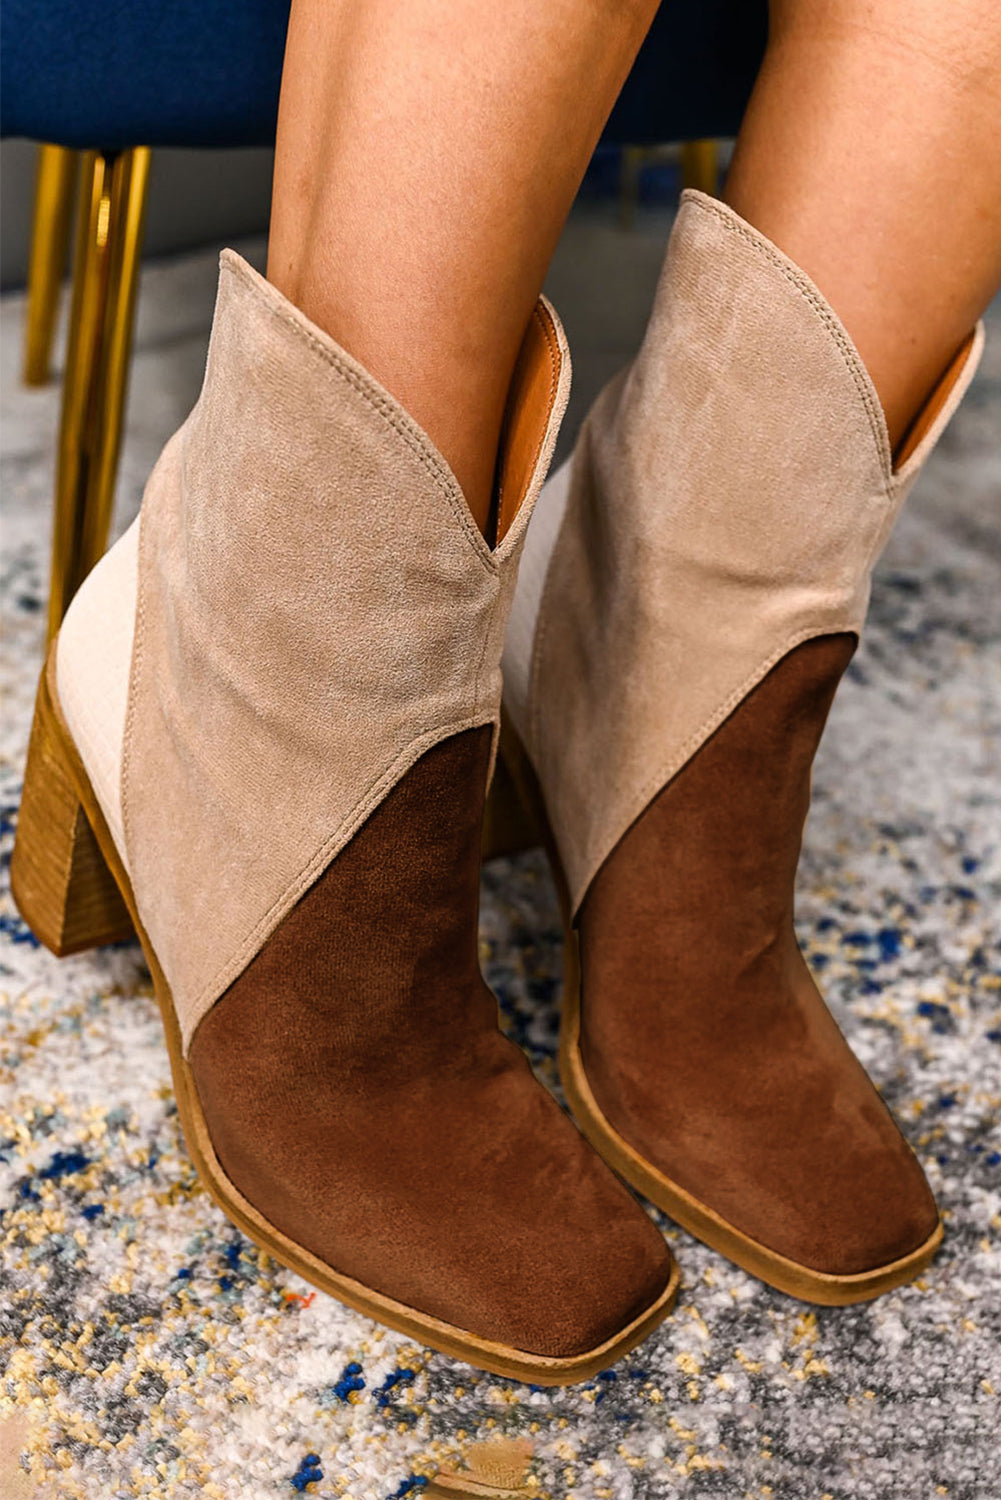 Chestnut 37 (6) 100%Polyester+100%TPR - Colorblock Suede Heeled Ankle Booties - womens boots at TFC&H Co.